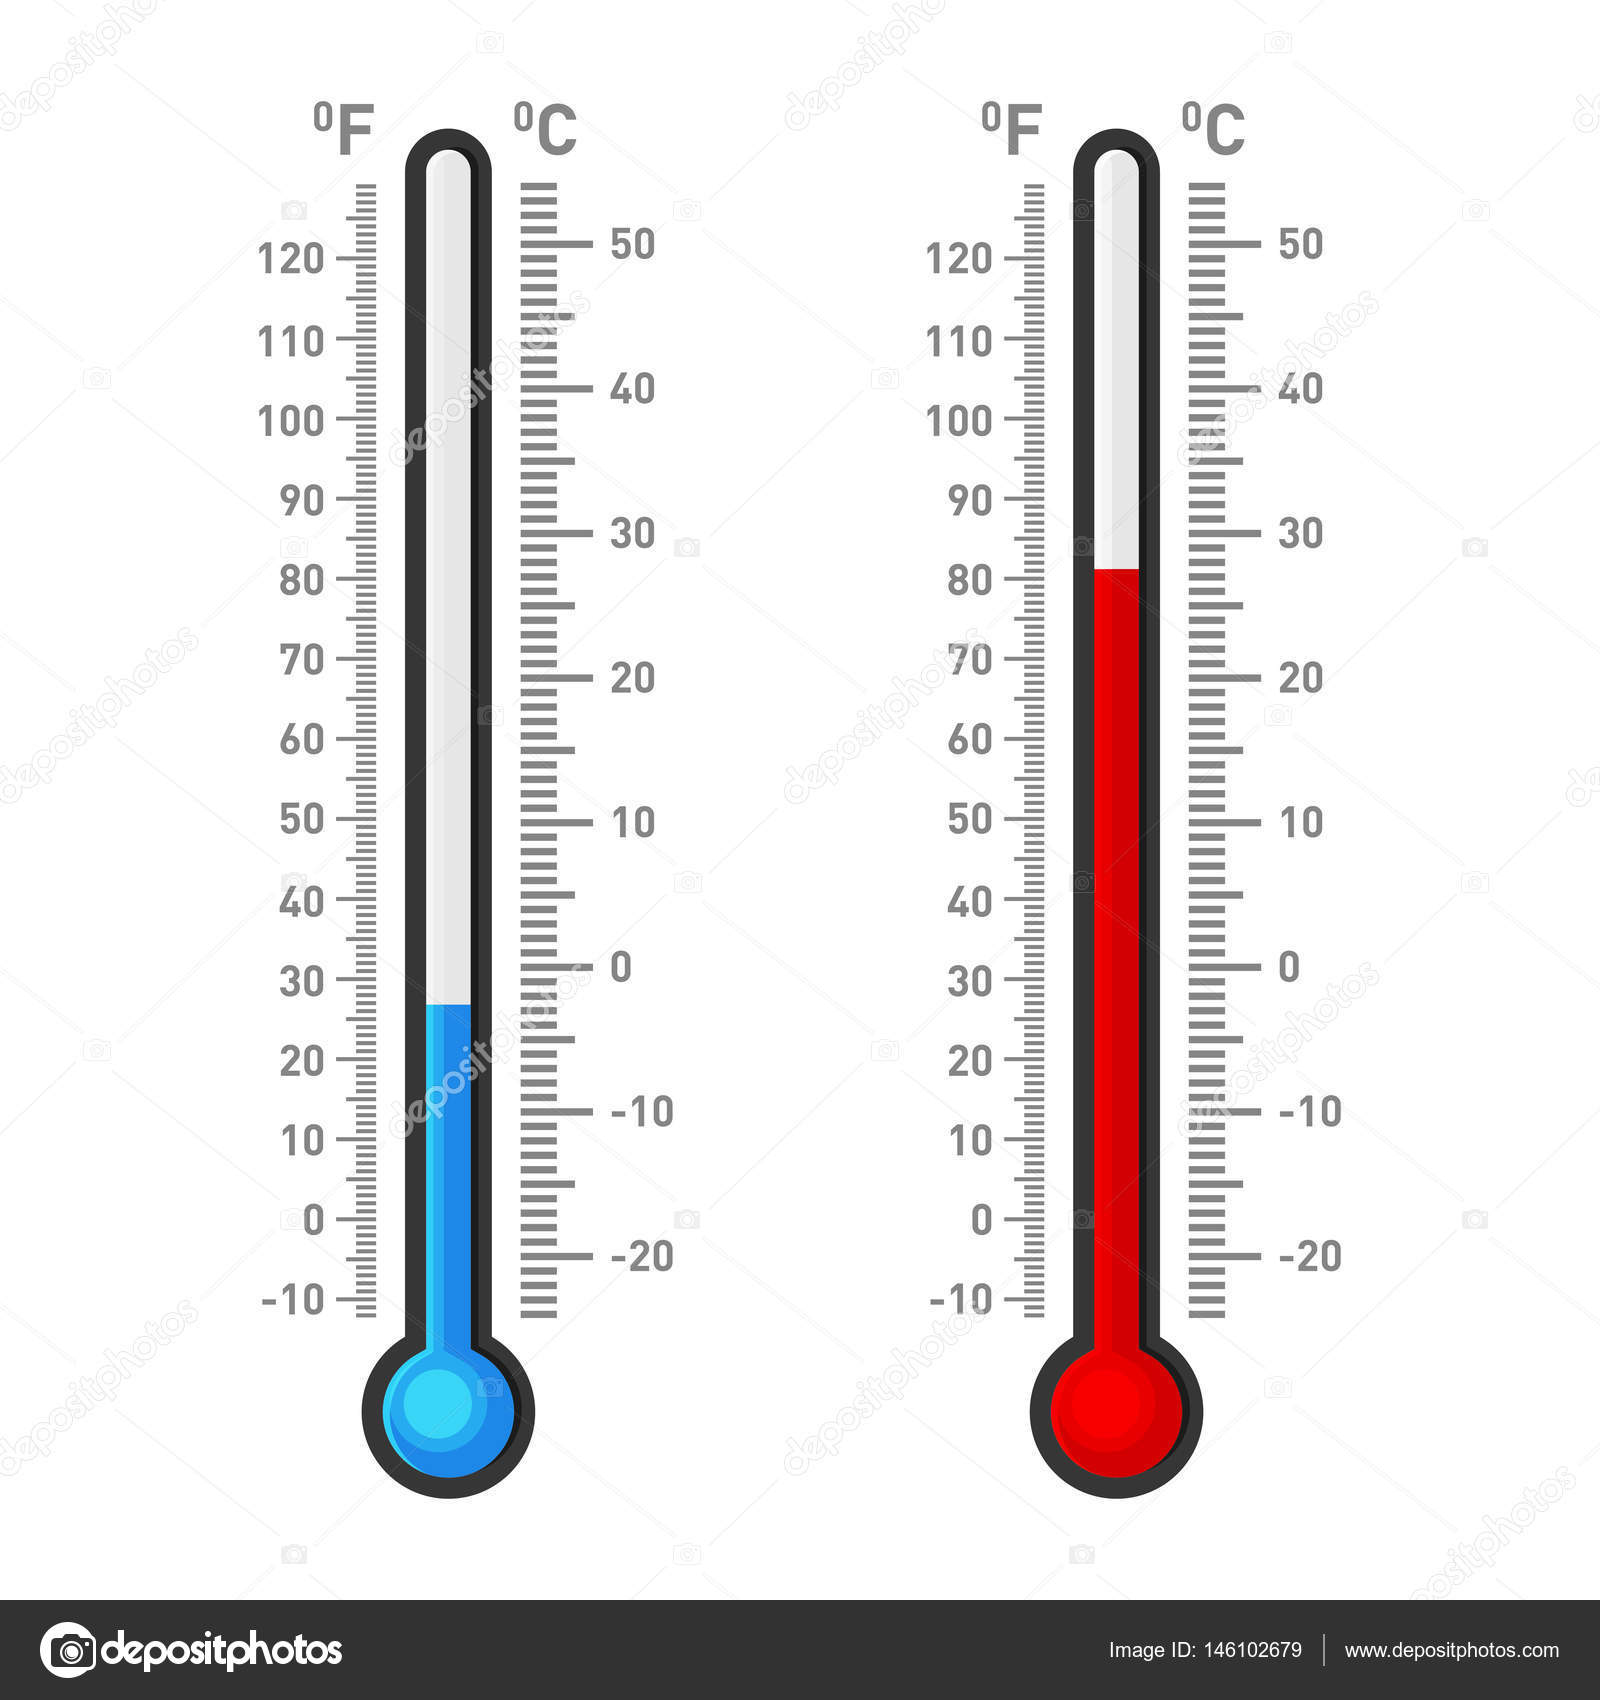 https://st3.depositphotos.com/1069290/14610/v/1600/depositphotos_146102679-stock-illustration-celsius-and-fahrenheit-thermometers-showing.jpg